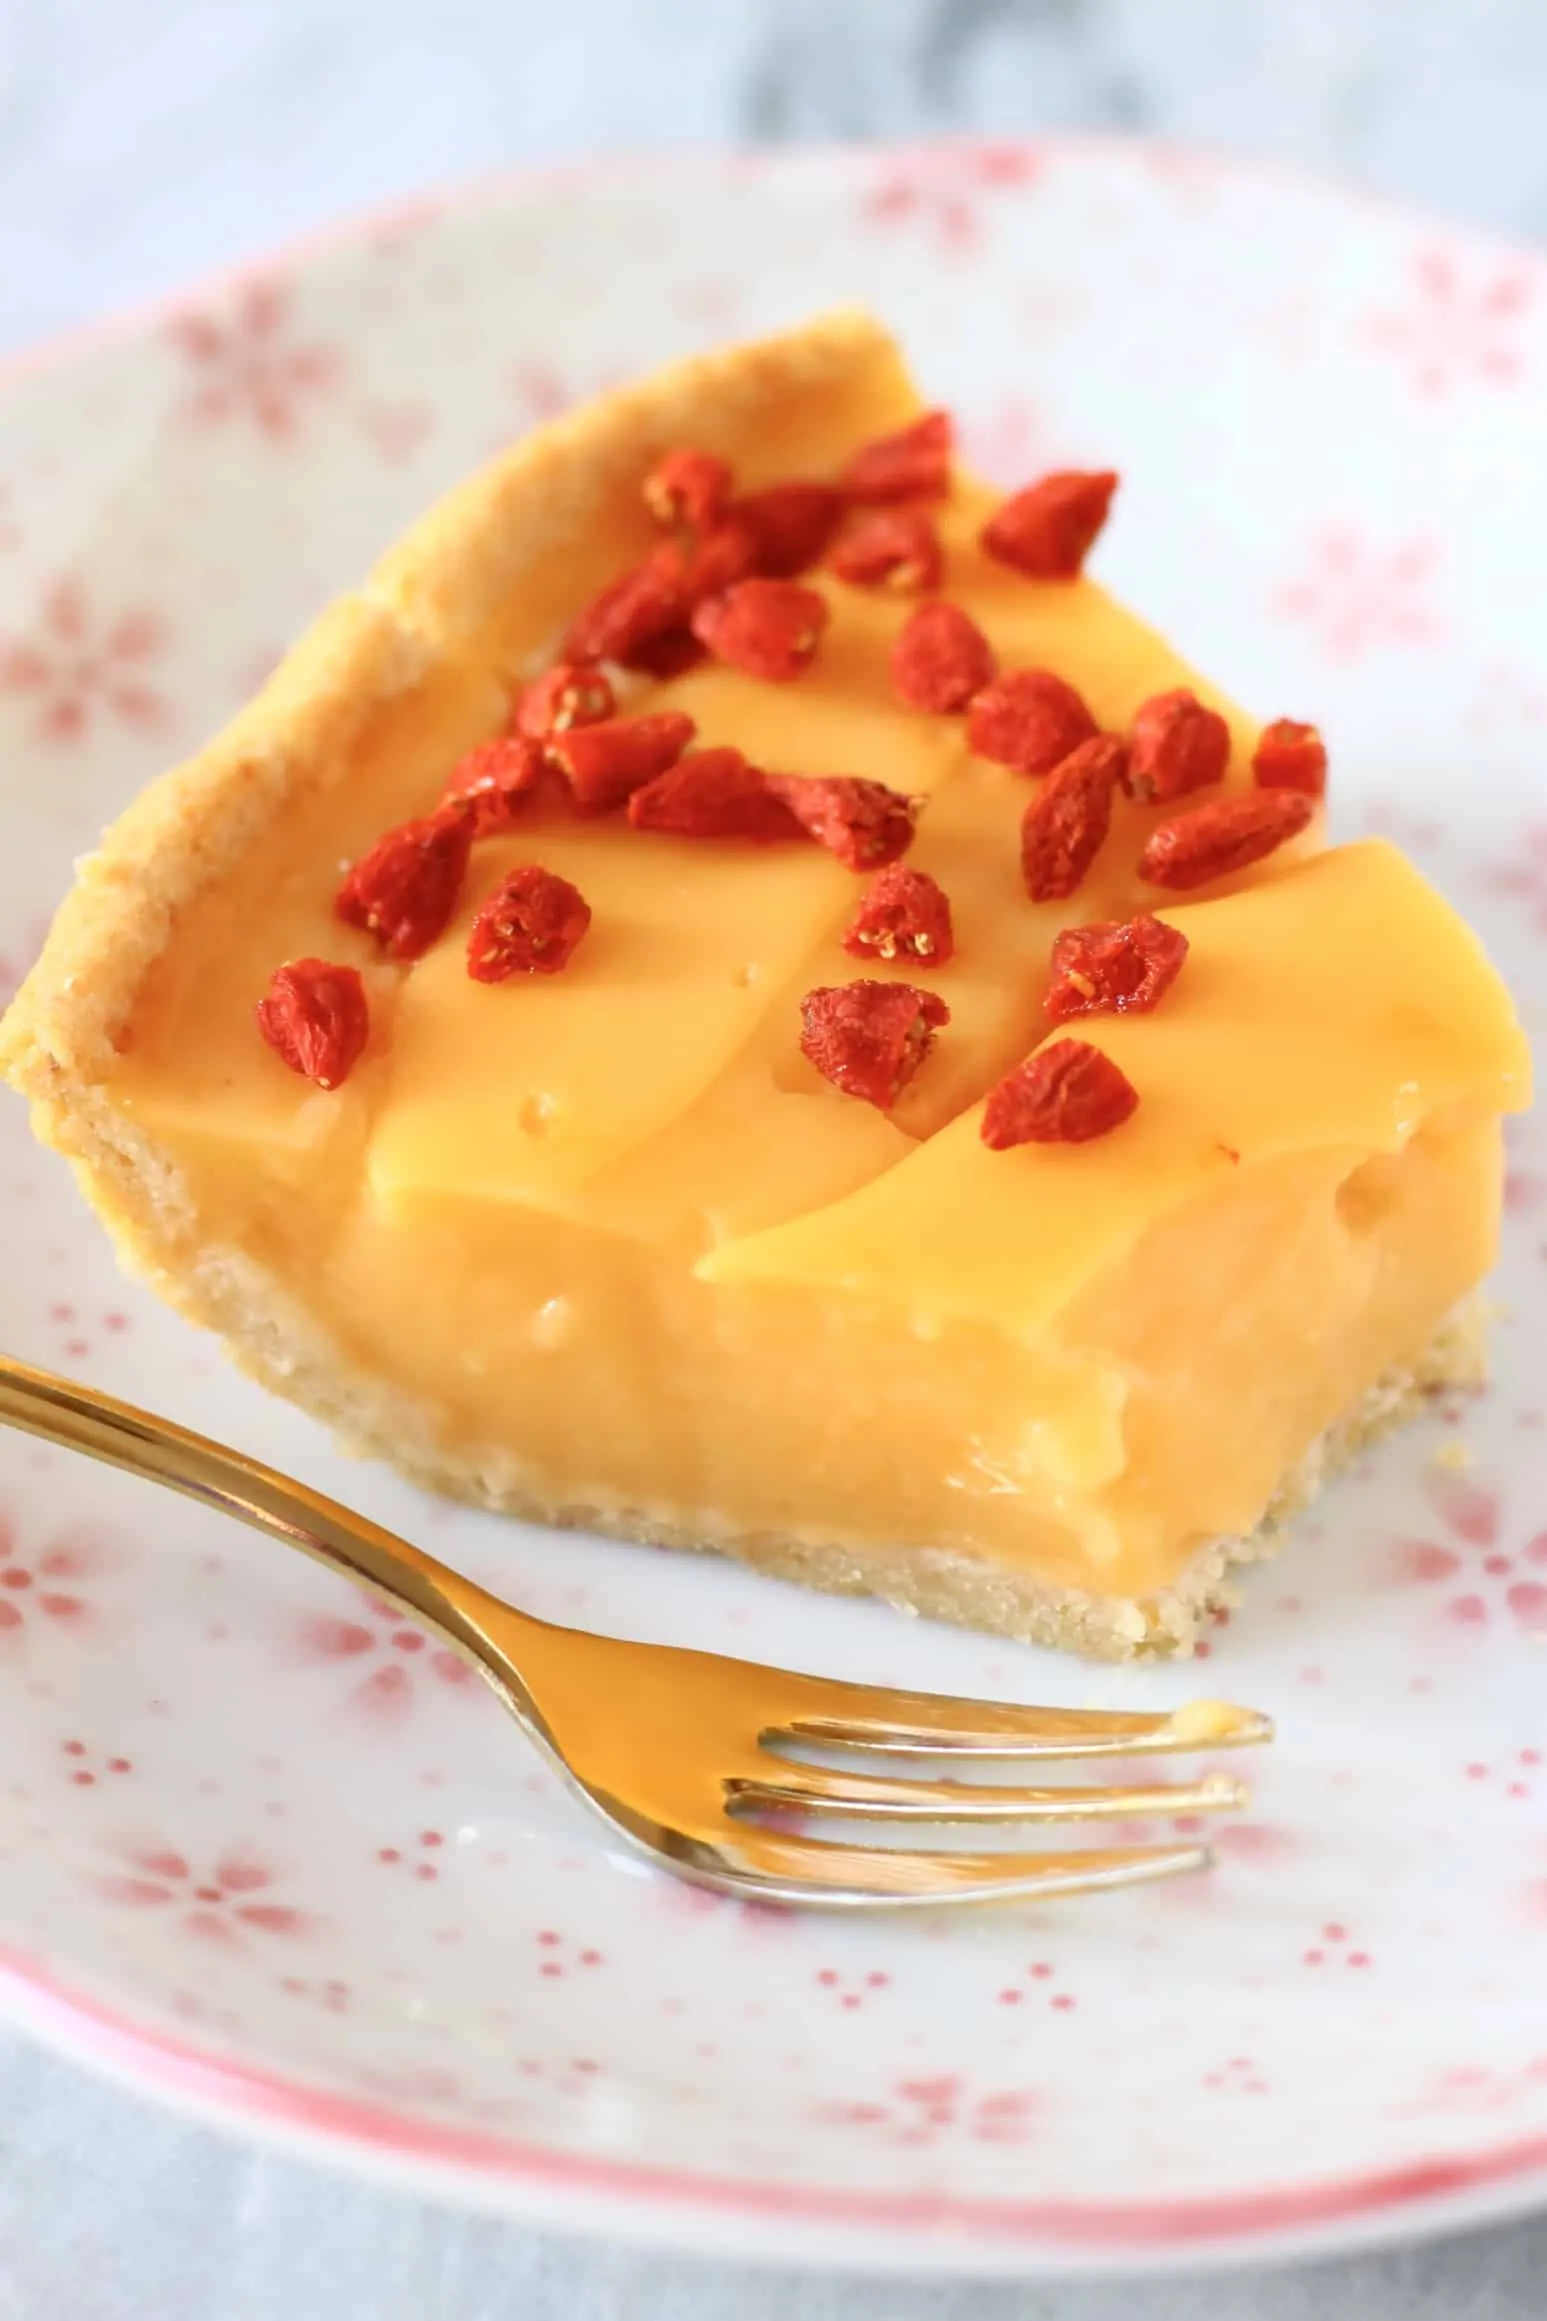 A slice of gluten-free vegan lemon tart on a plate with a gold fork